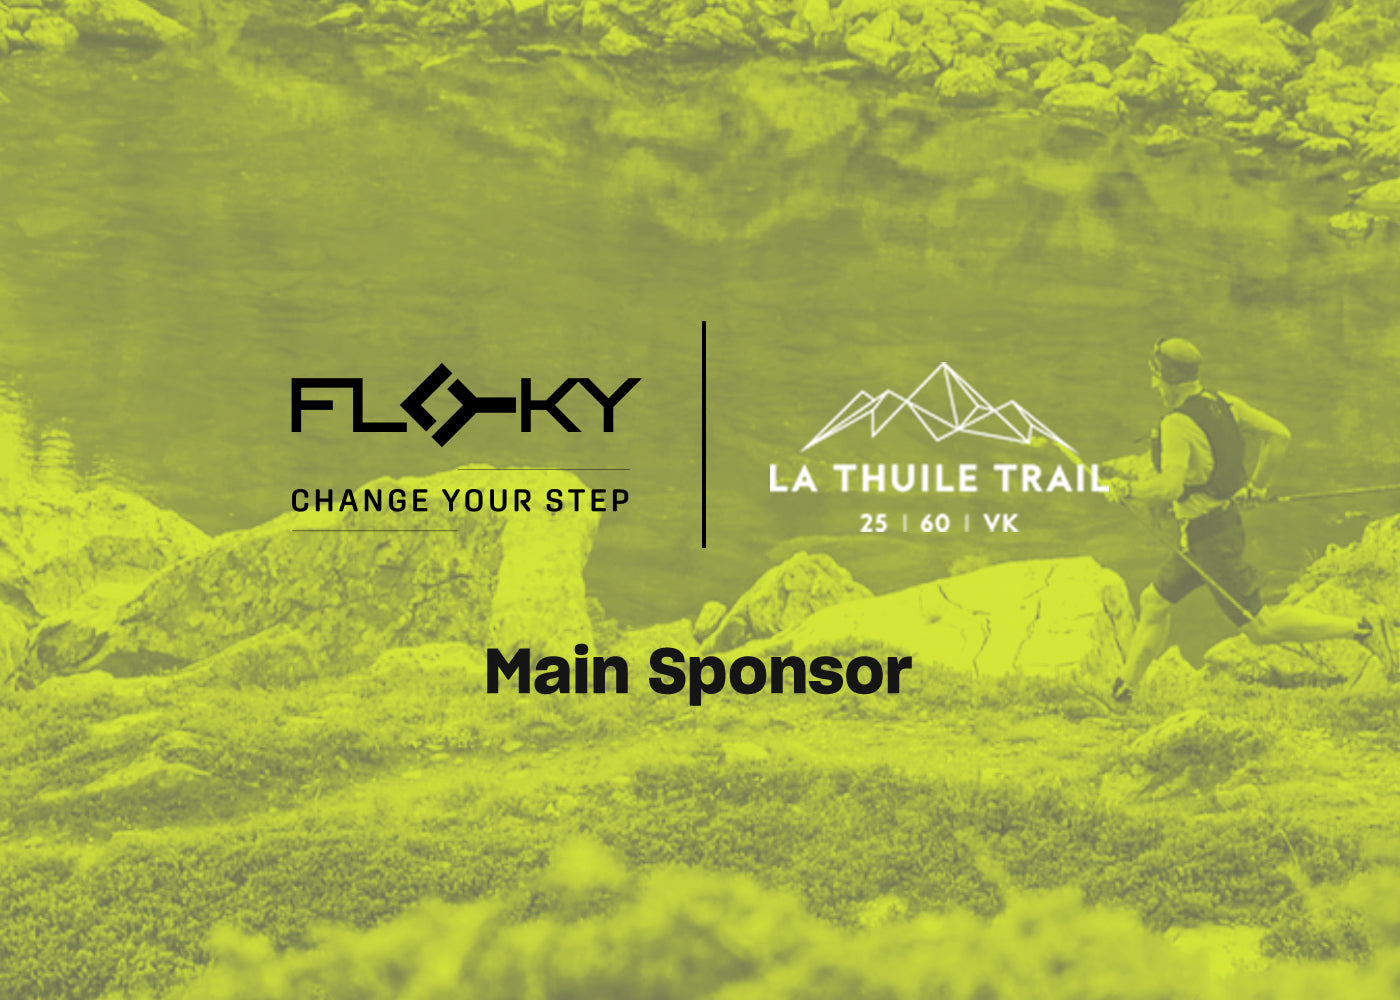 FLOKY Main Sponsor of La Thuile Trail: full immersion in the wilderness of the Alps